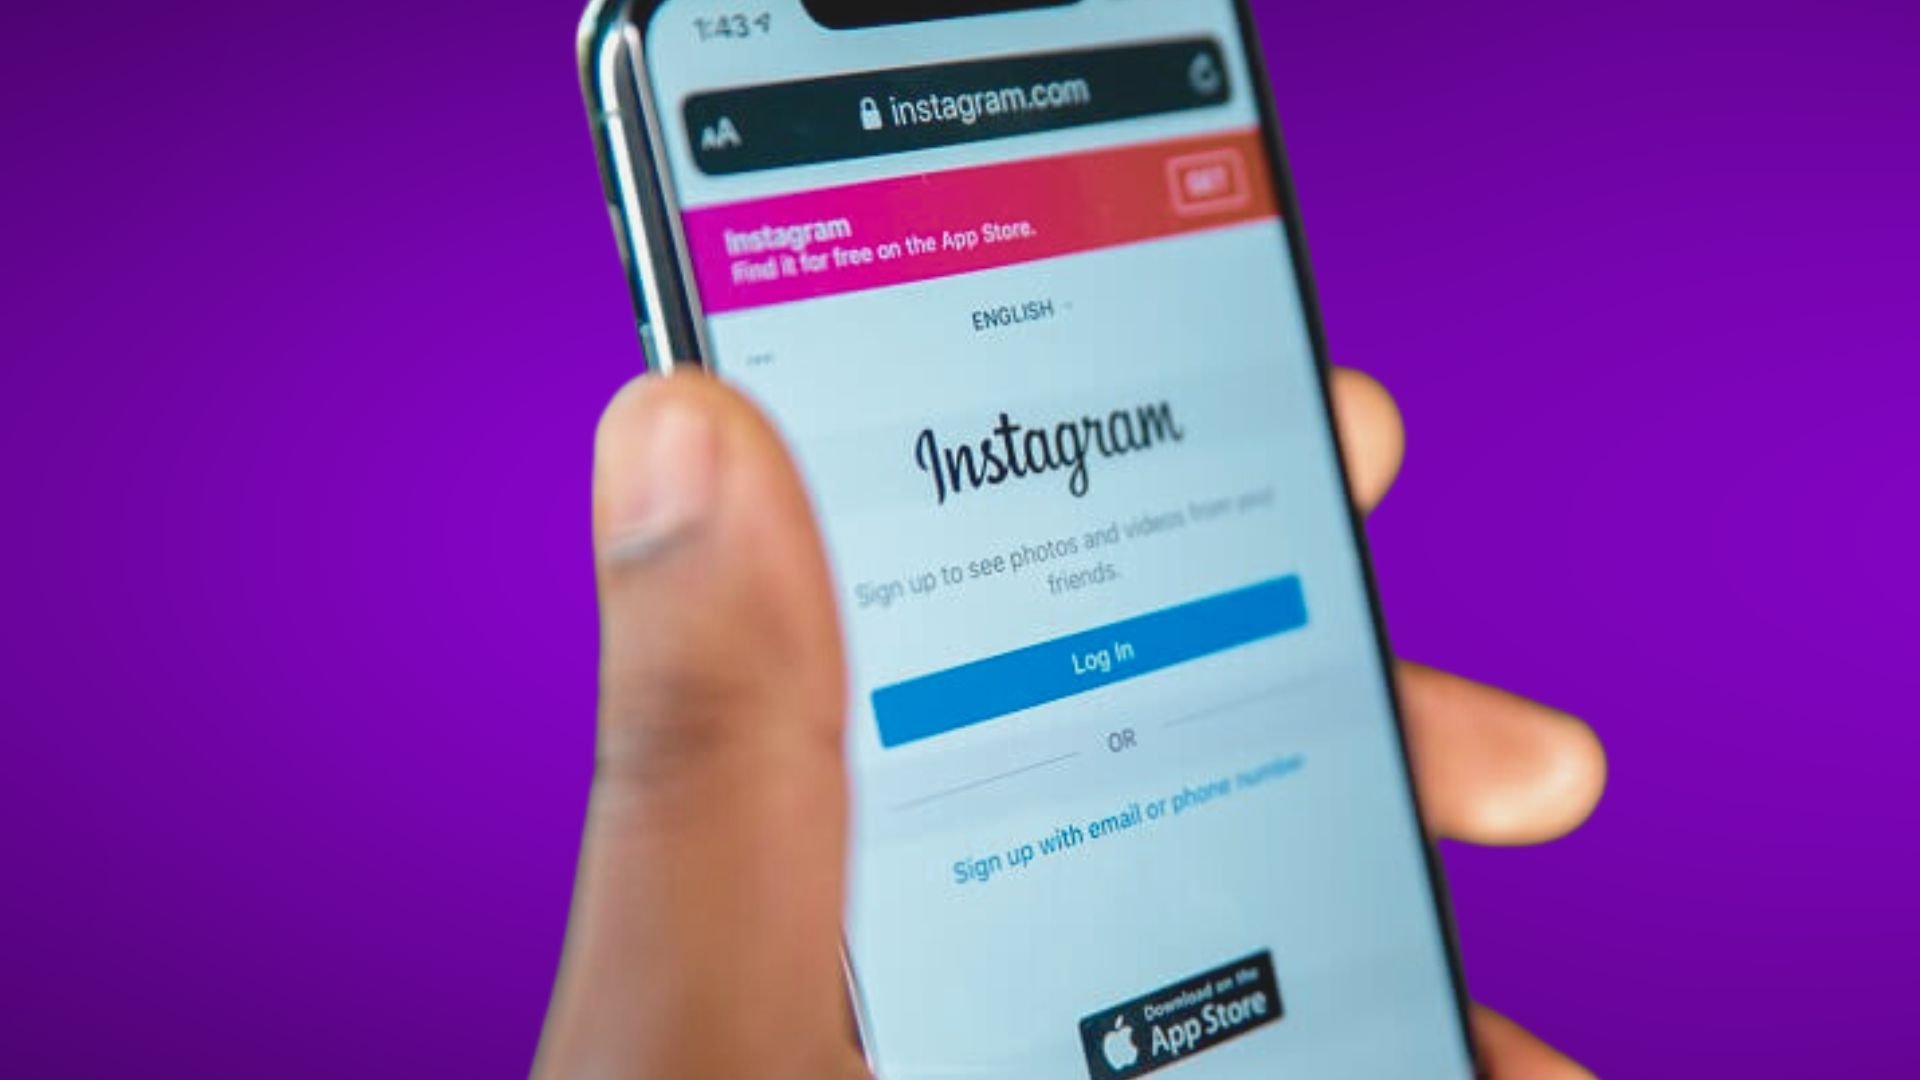 How to Fix Instagram Frozen on iPhone [Troubleshooting Guide]